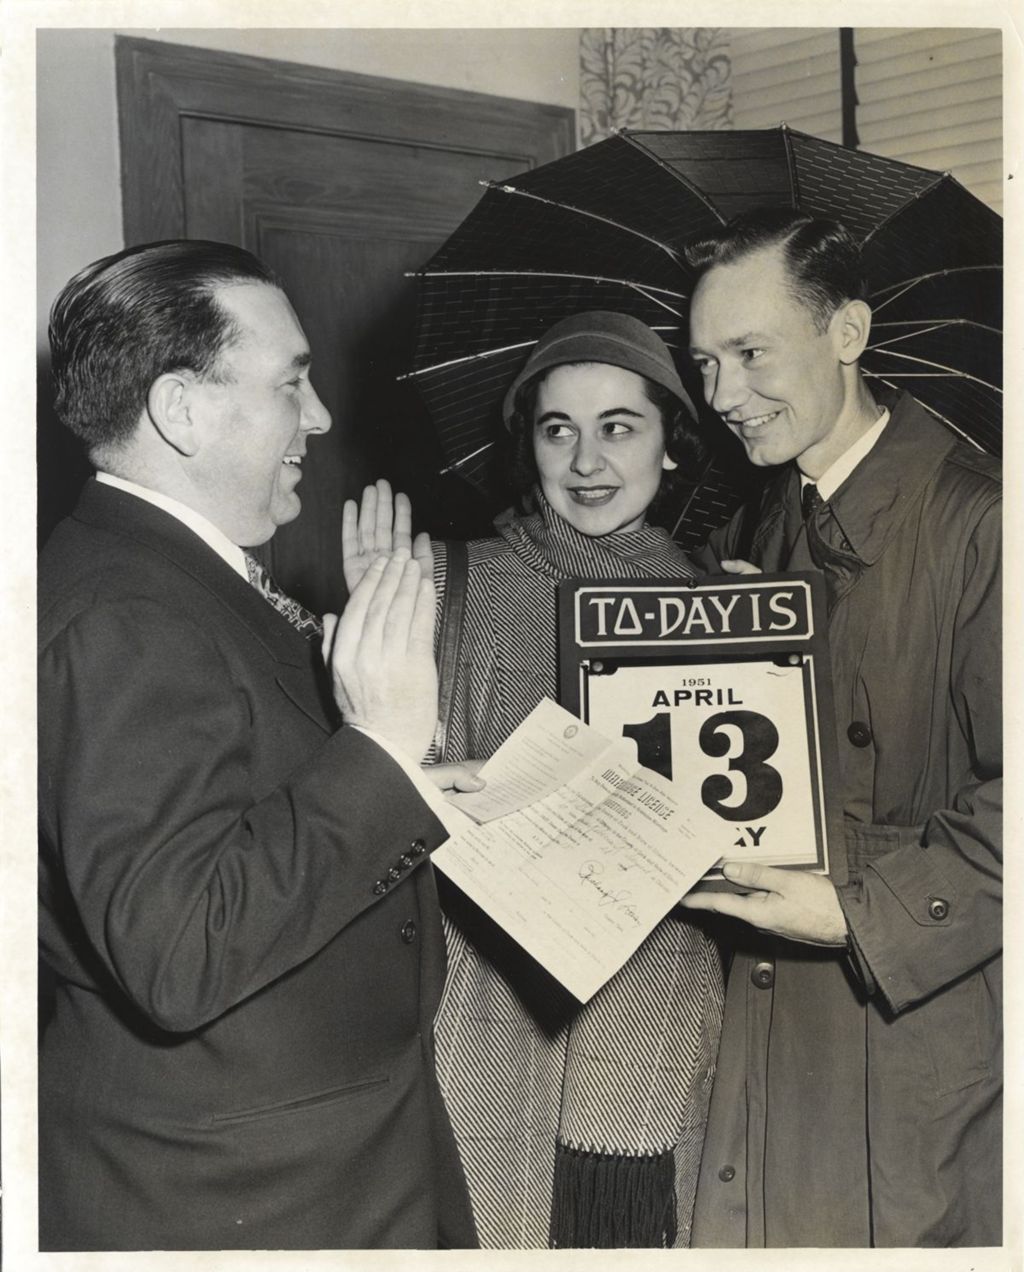 Richard J. Daley marrying a couple on Friday the 13th